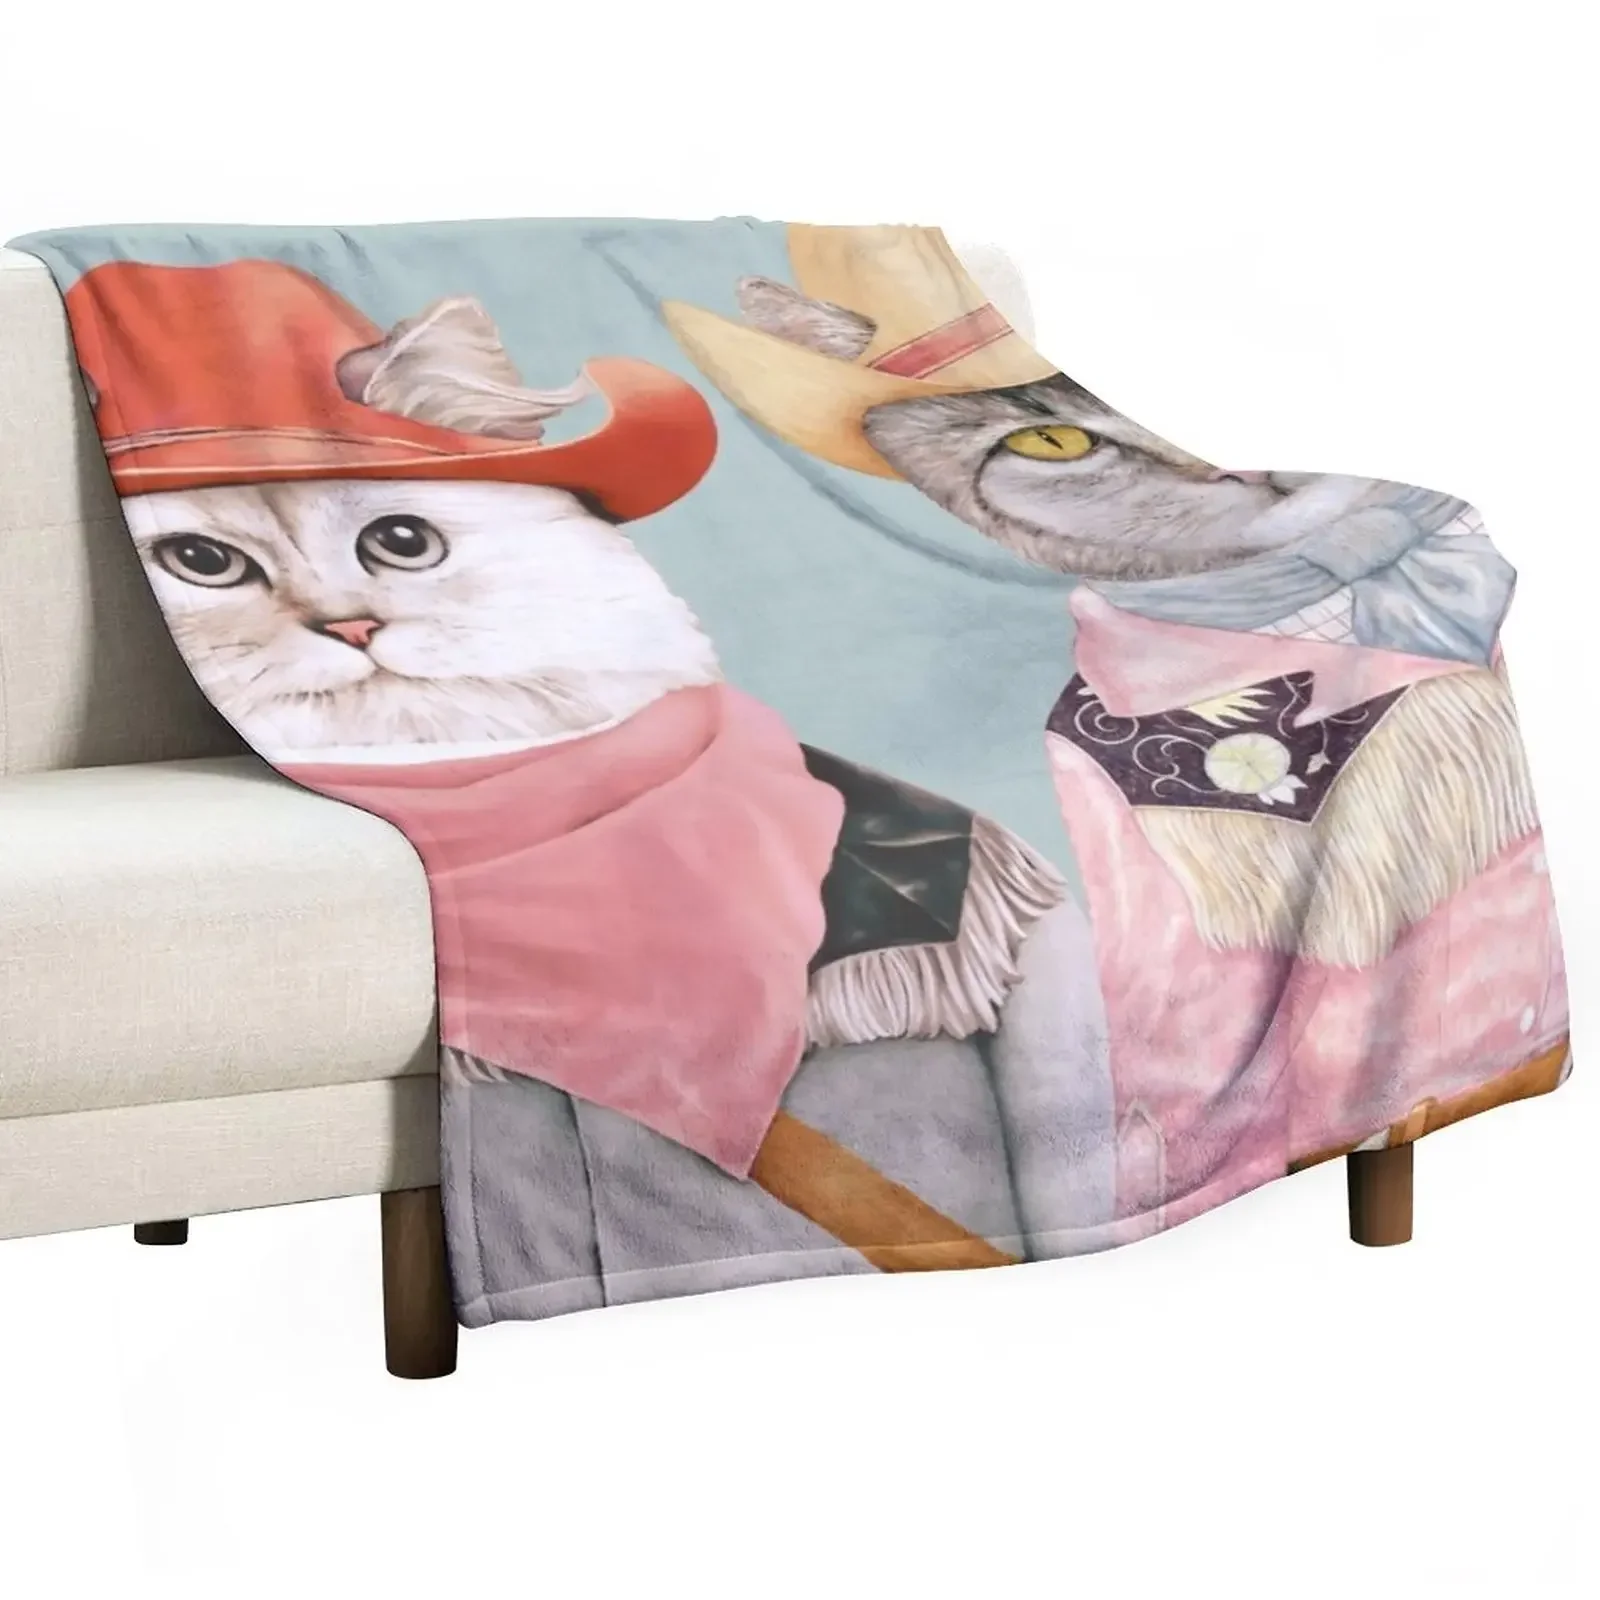 

Cowboy Cats Throw Blanket wednesday Flannel Fabric Multi-Purpose Giant Sofa Blankets